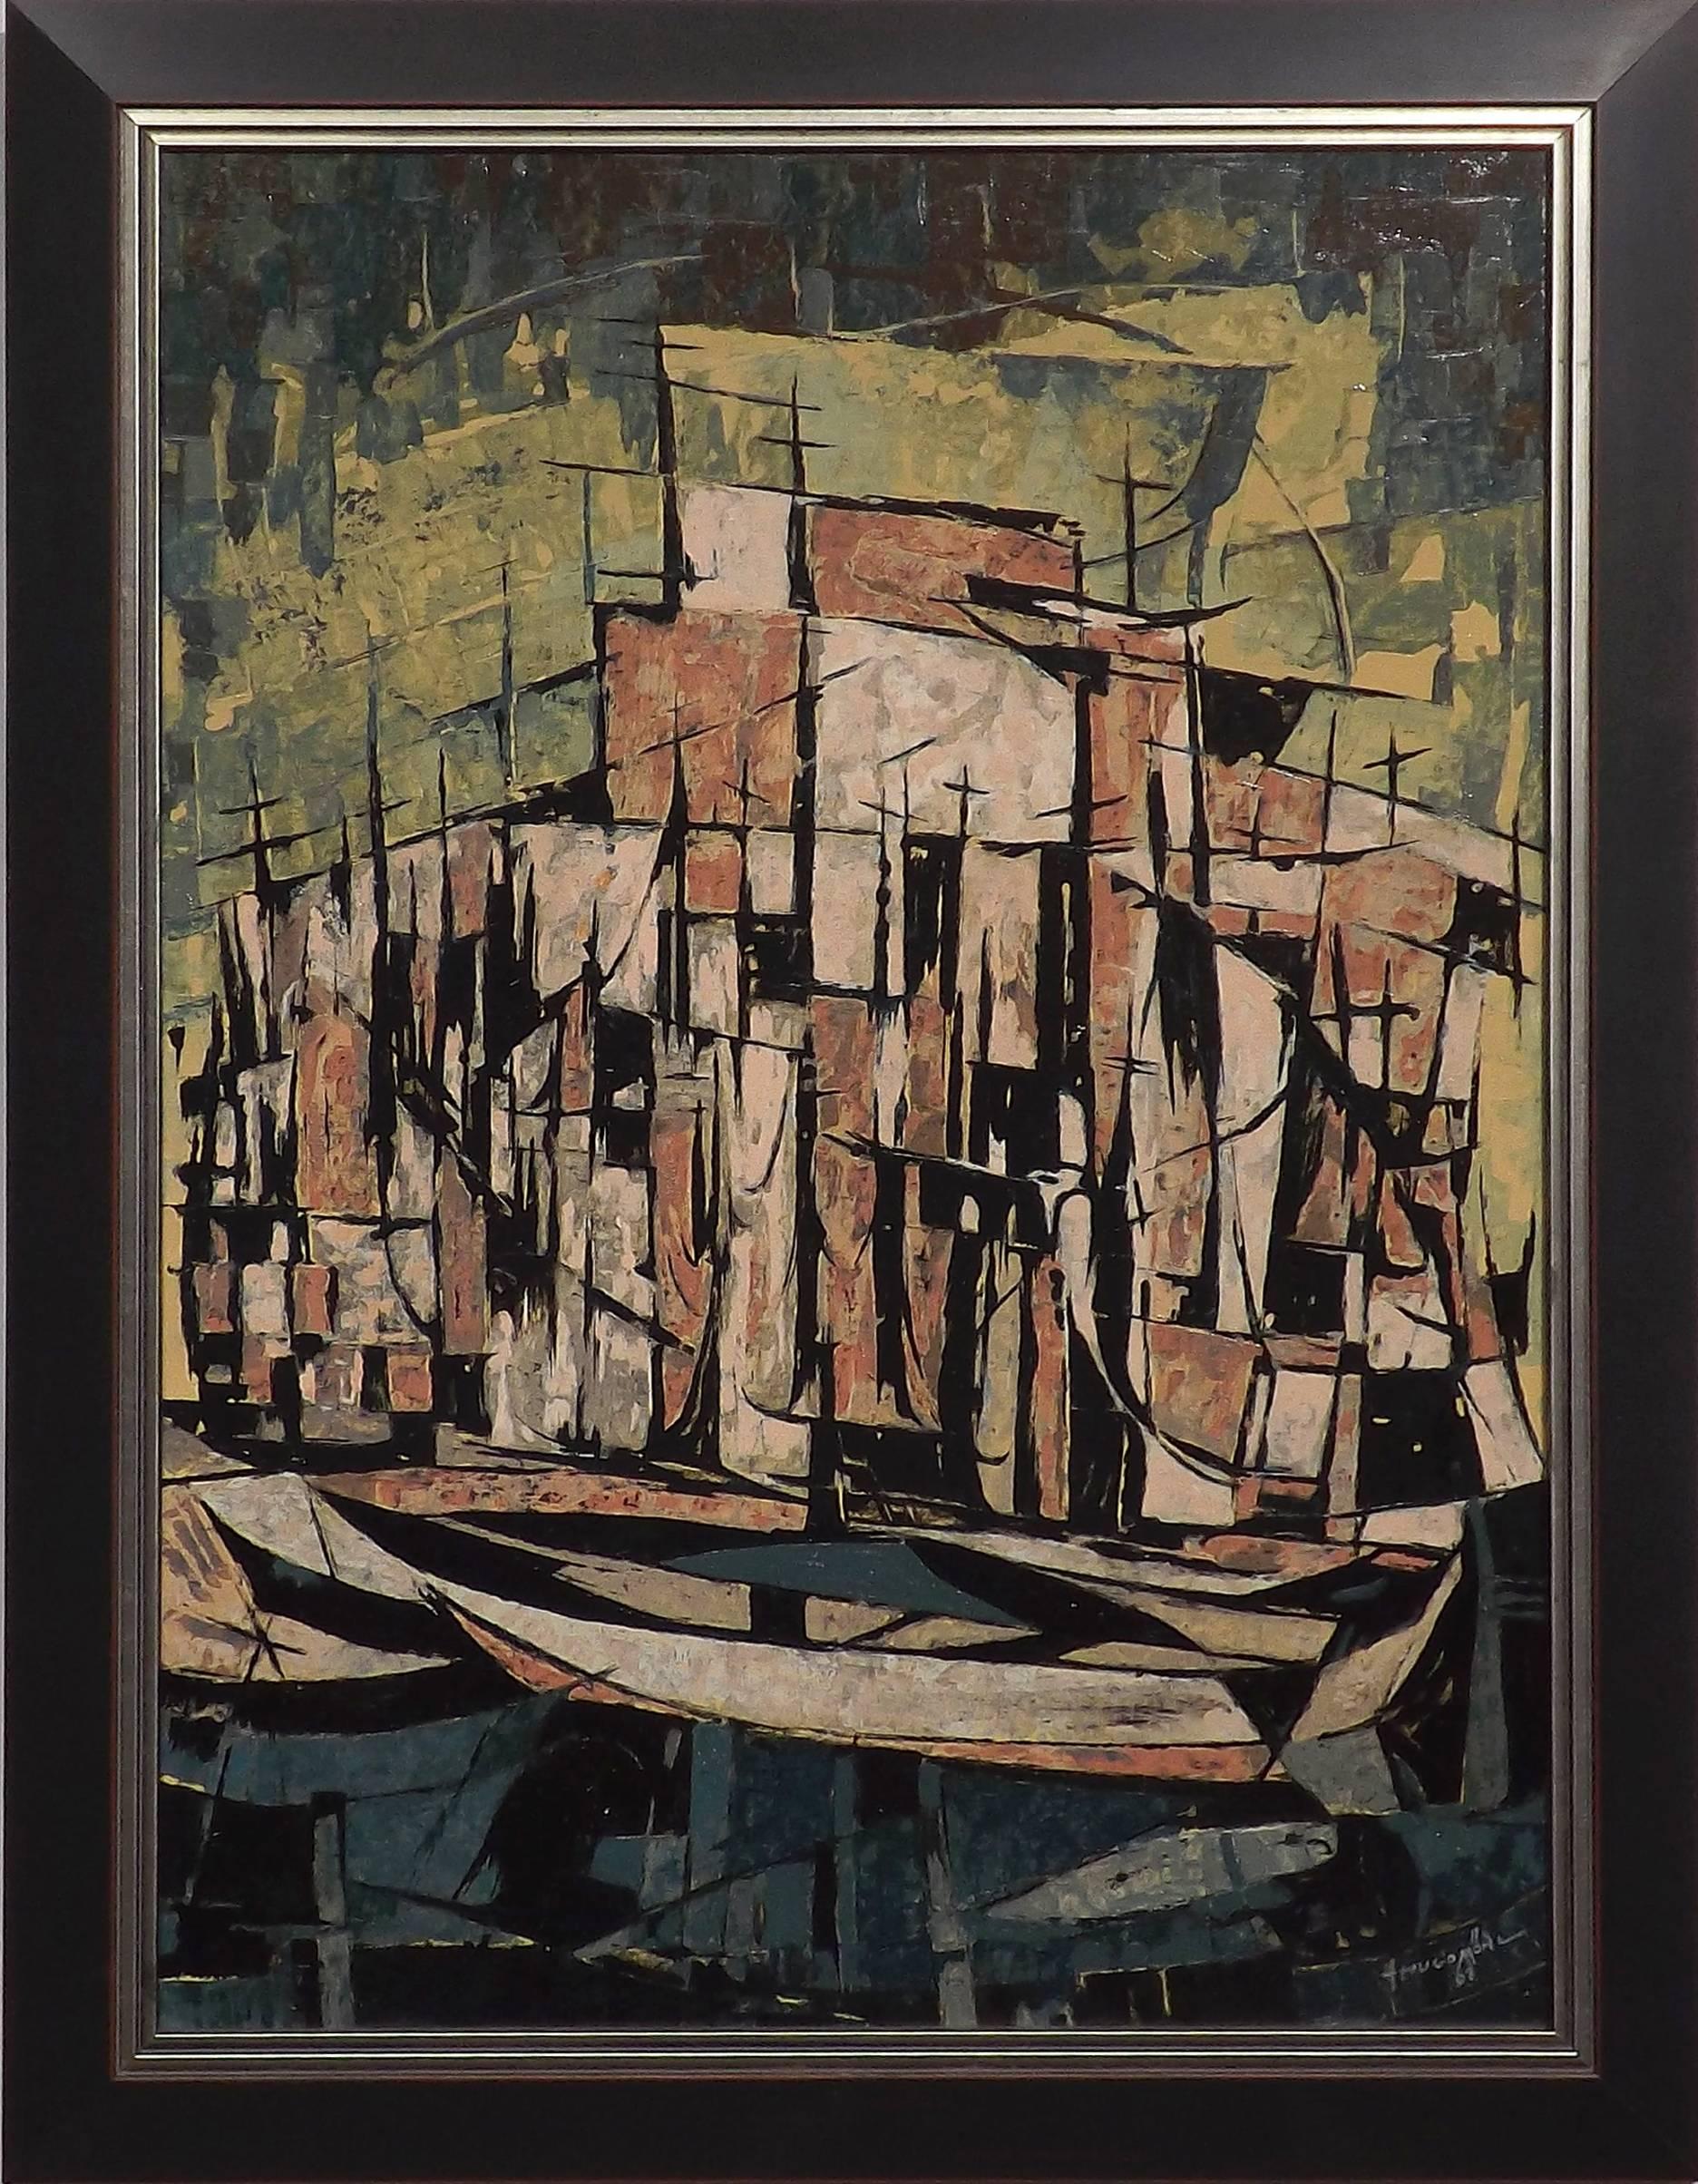 'Segel Hafen,' German for yacht harbor, oil on panel dated 1967 by Hugo Mohl. Born in 1893 in Dusseldorf, Germany and graduated from the Academy of Fine Arts in Berlin. Began his professional career as a traditional representational artist. Hugo